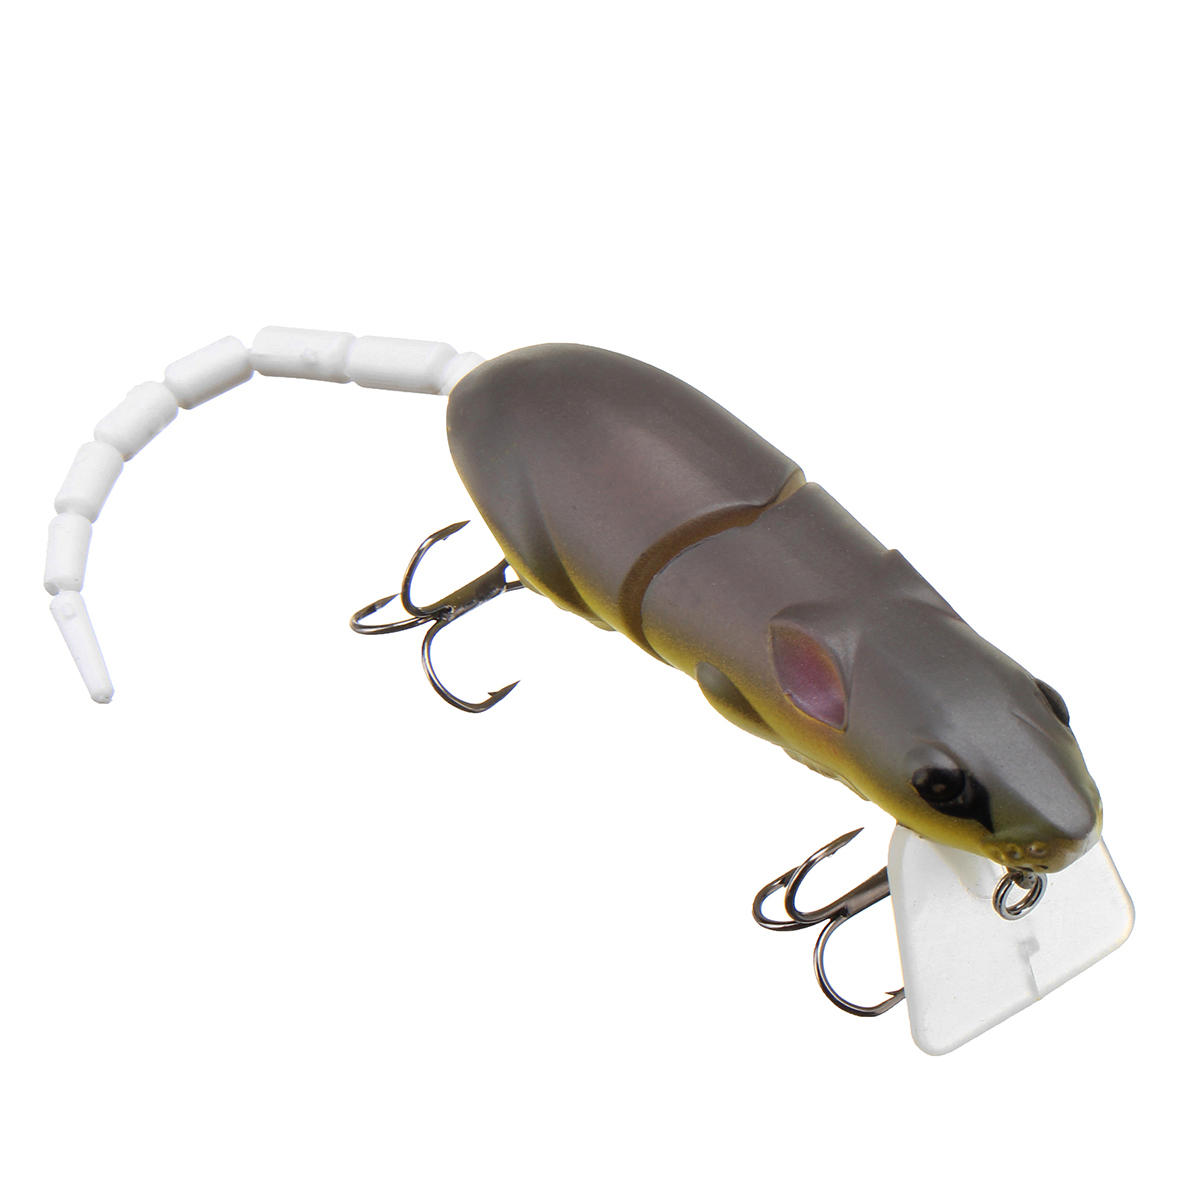 25cm-155g-Jointed-Rat-Fishing-Lure-Mouse-Floating-Crankbait-Sea-Topwater-3D-Eyes-Artificial-Baits-1354966-5